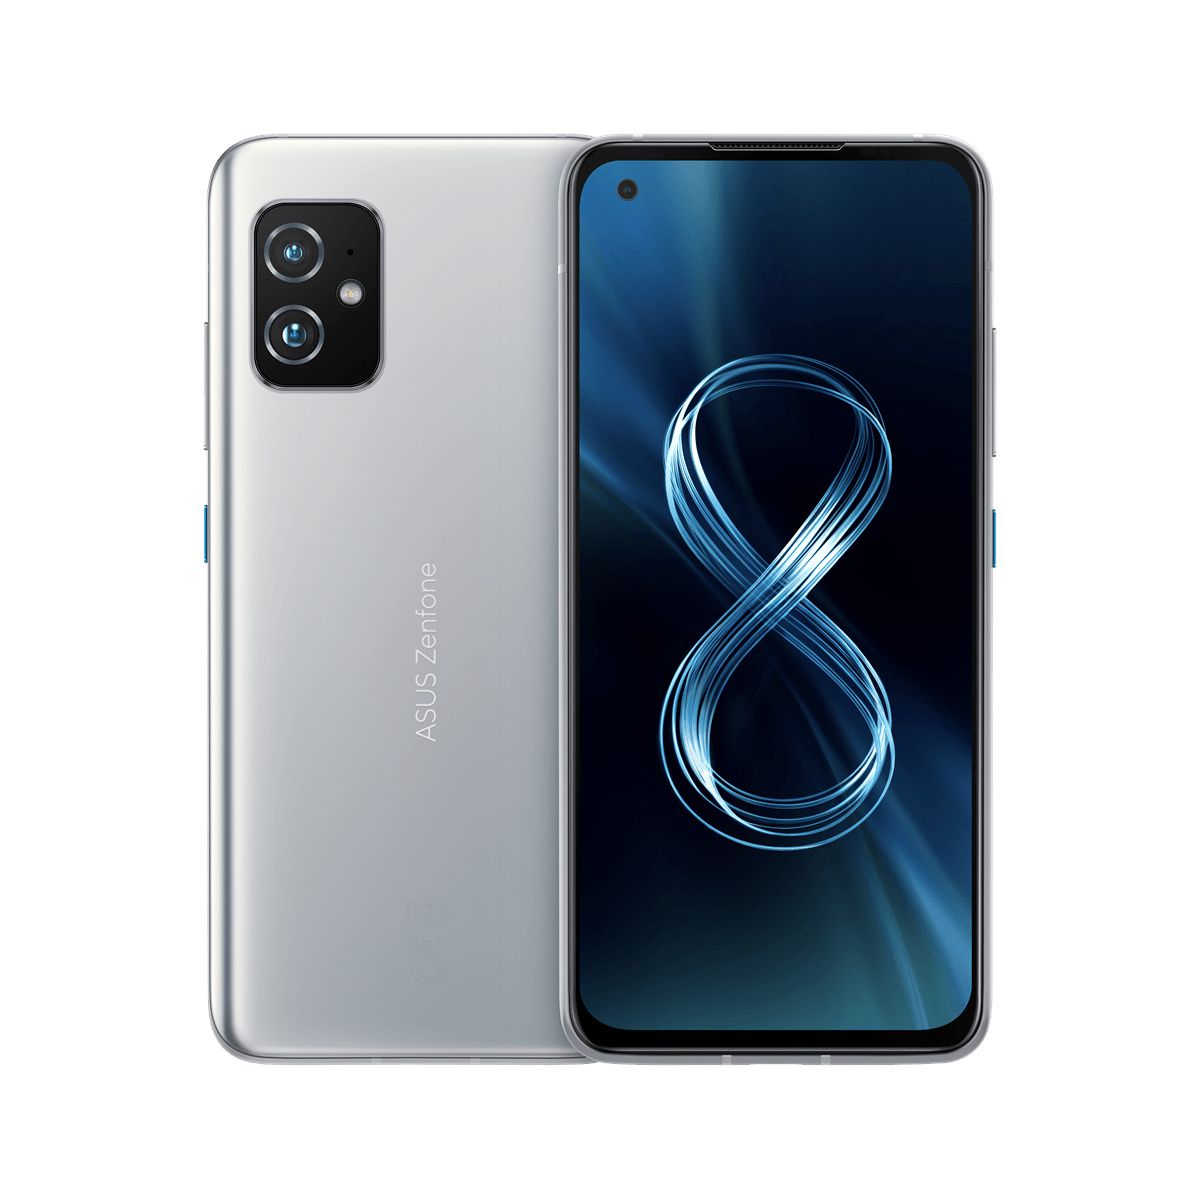 If you like small phones and still want powerful specs, the Zenfone 8 can be a great option.